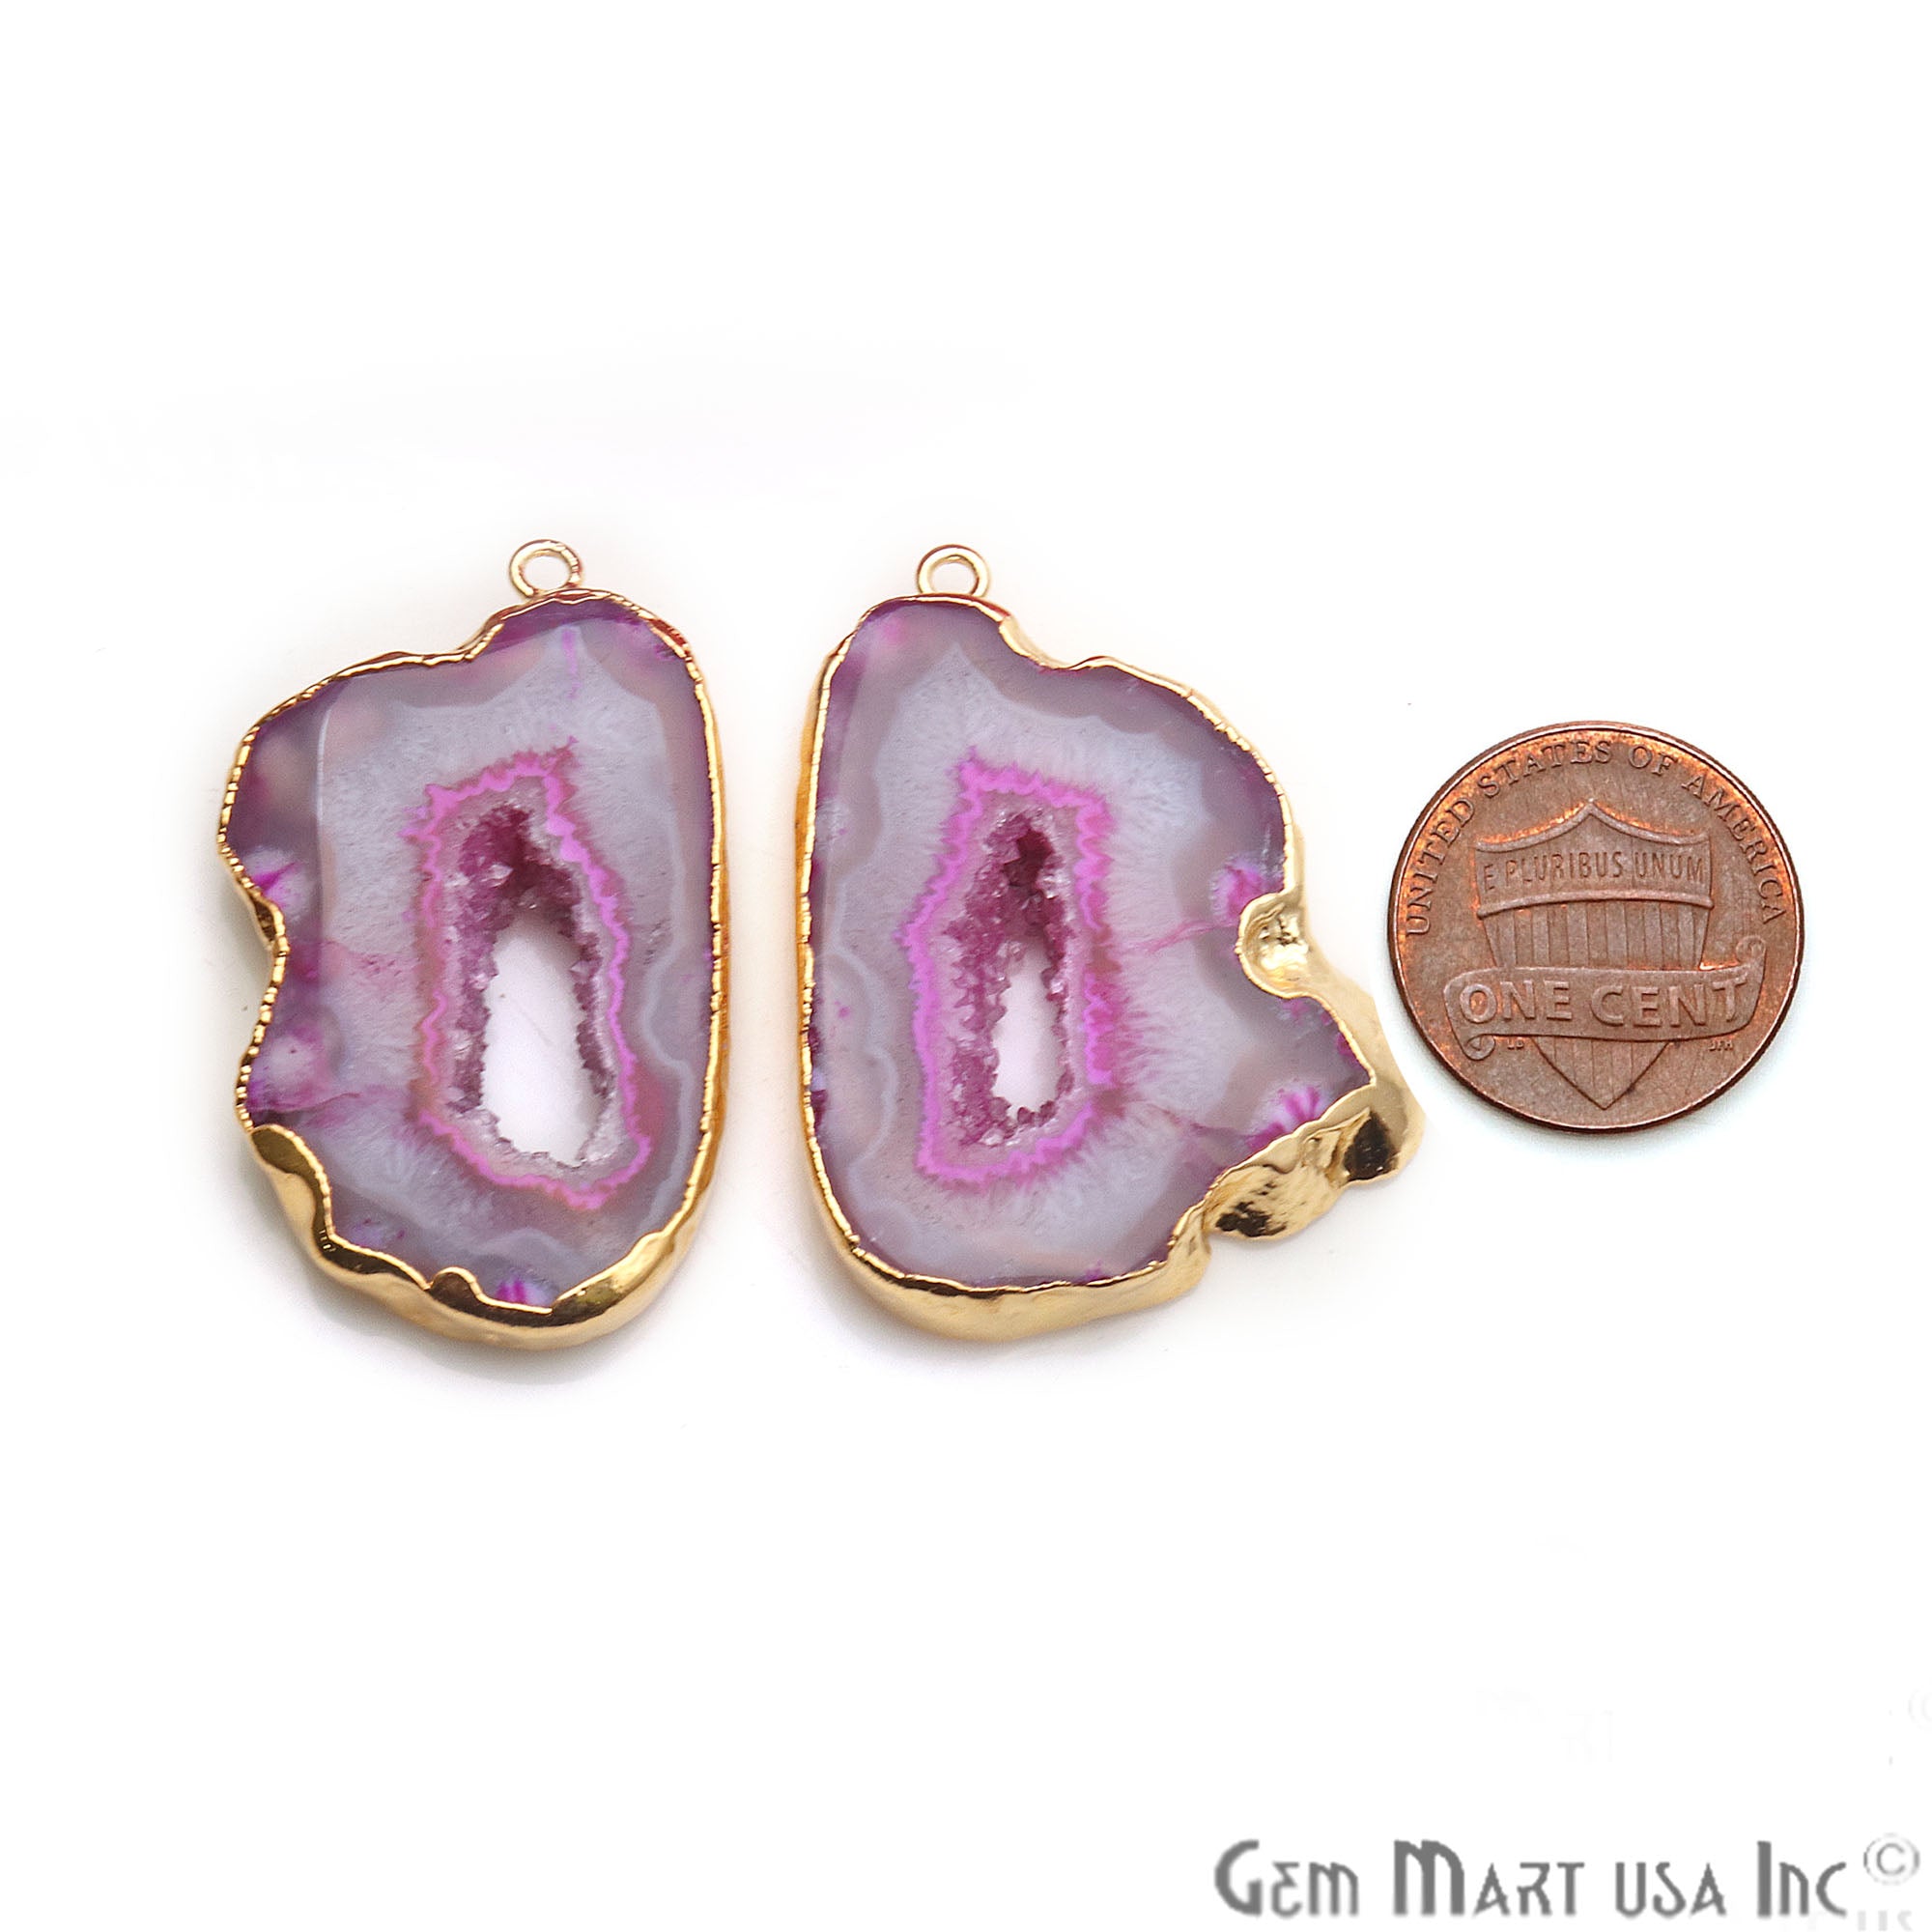 Agate Slice 40x23mm Organic Gold Electroplated Gemstone Earring Connector 1 Pair - GemMartUSA